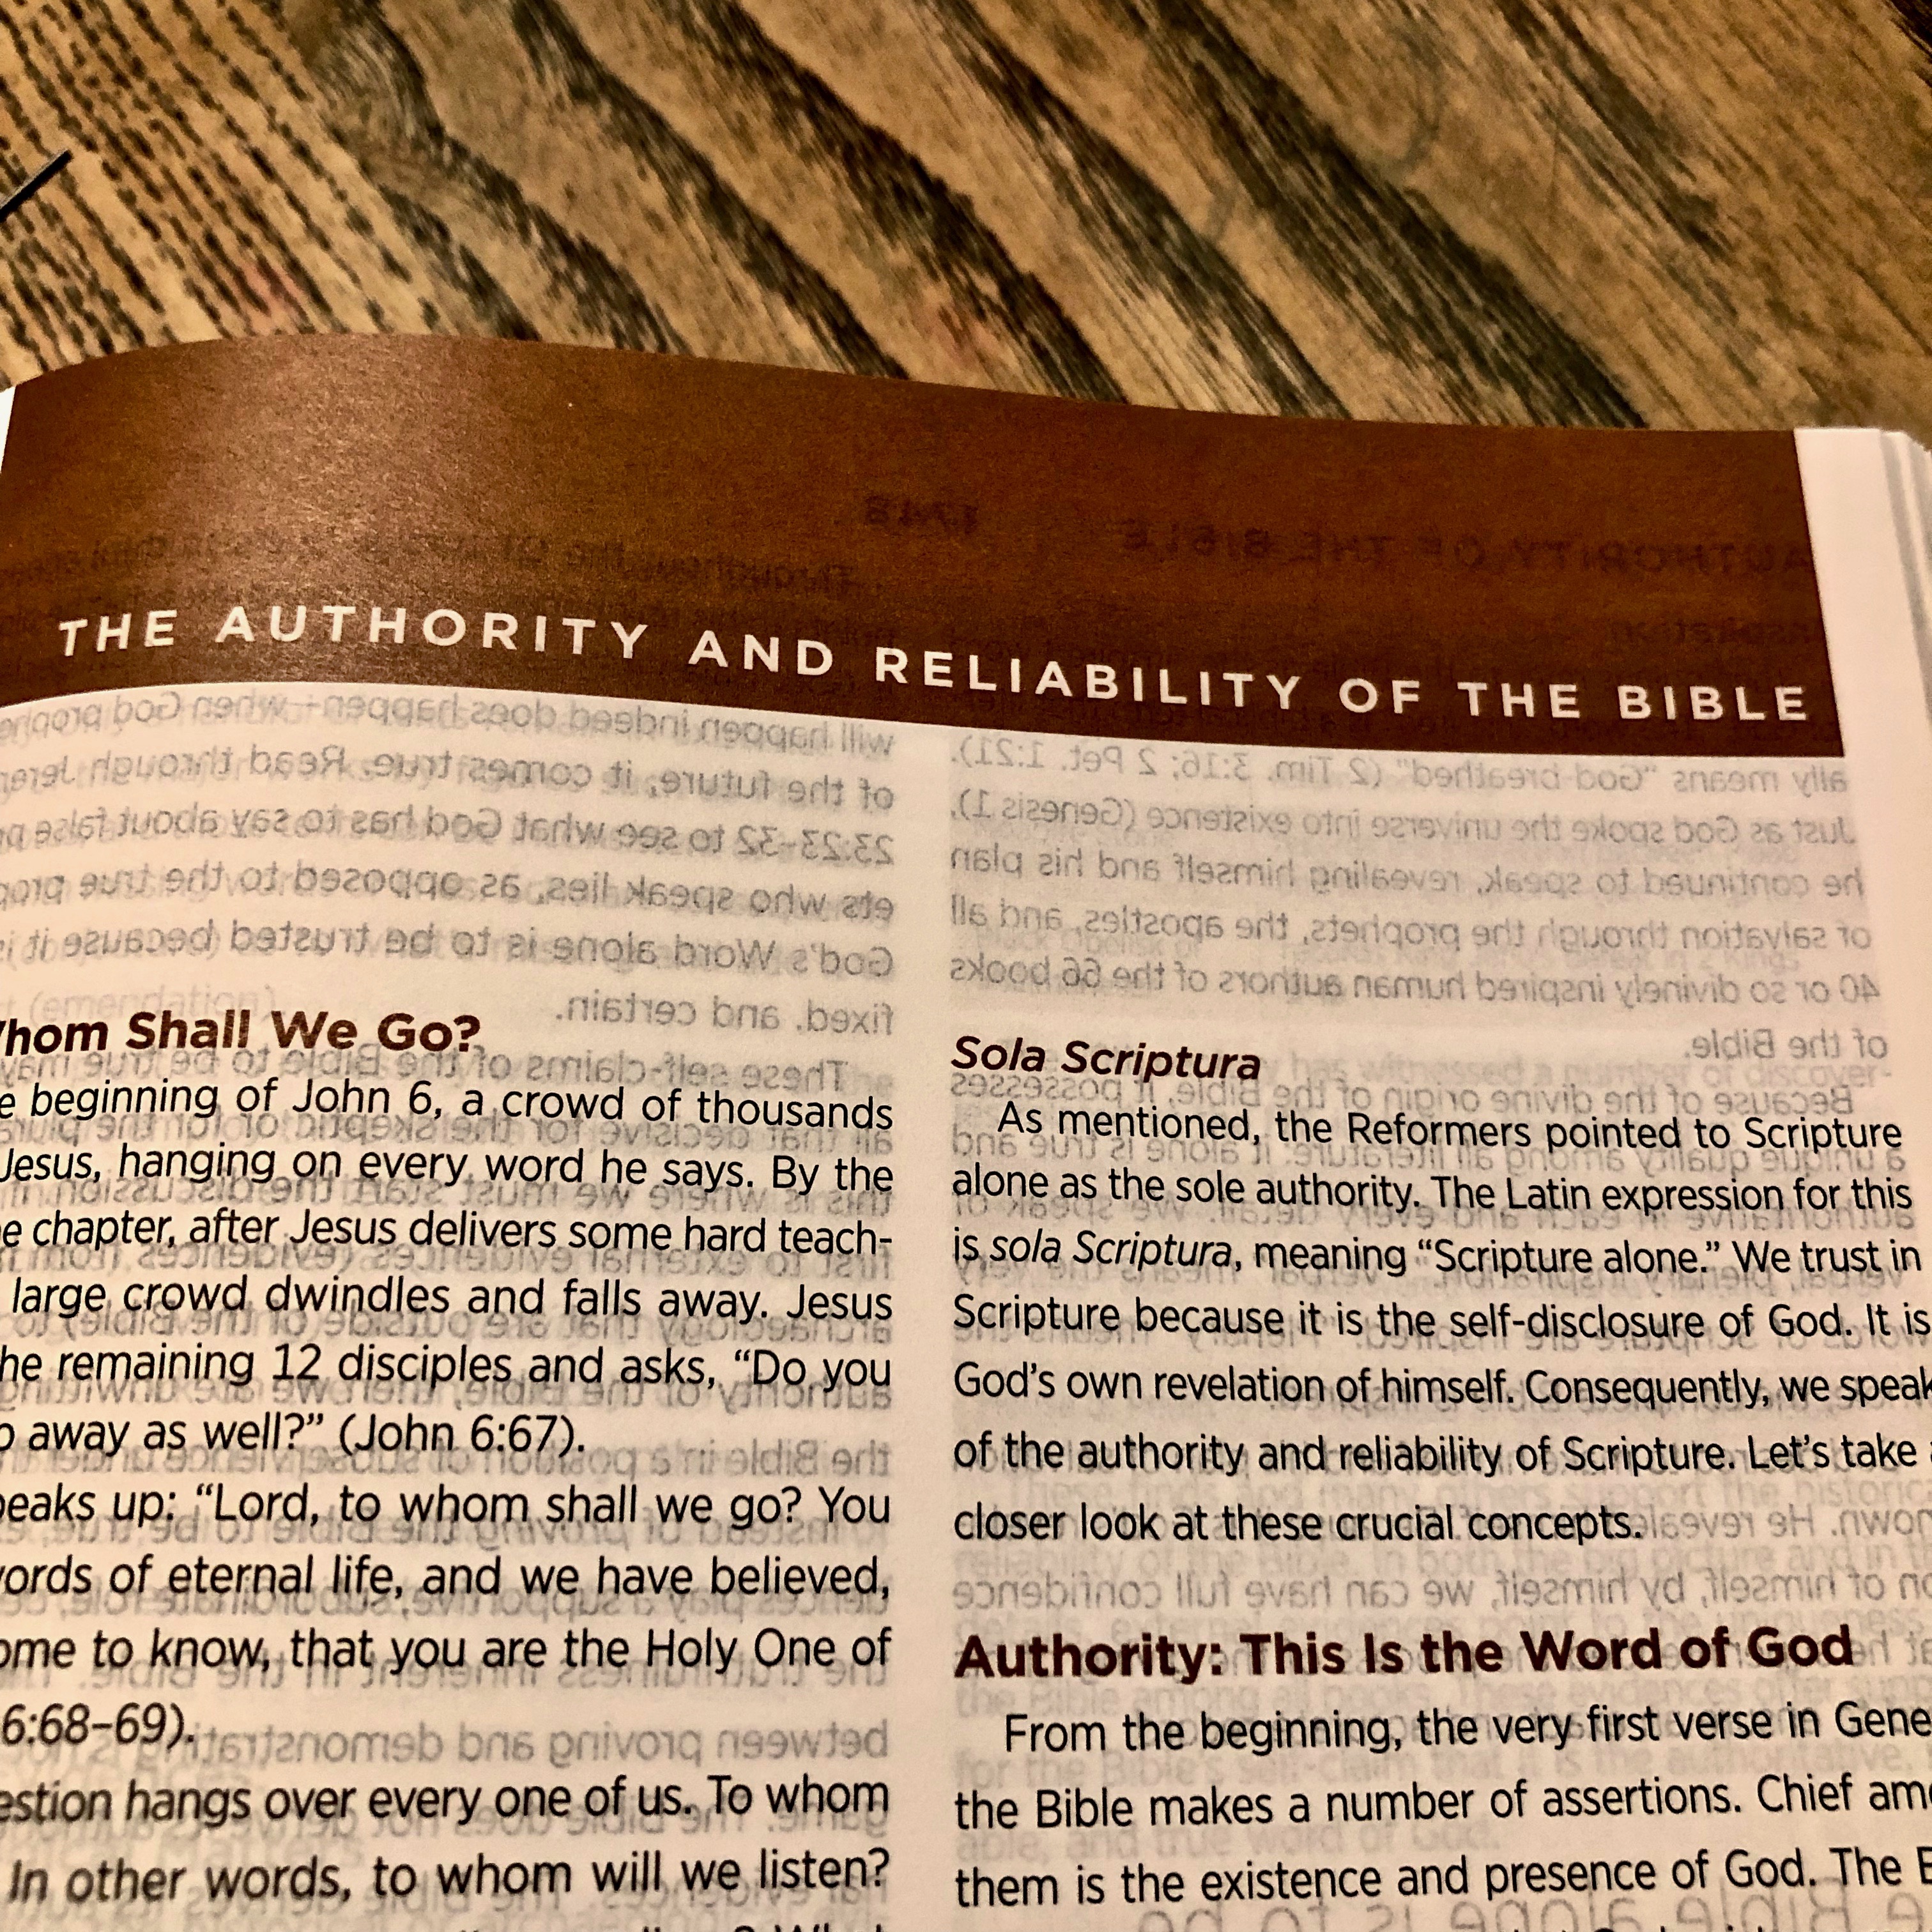 Article titled "The Authority and Reliability of the Bible" in the ESV Student Study Bible